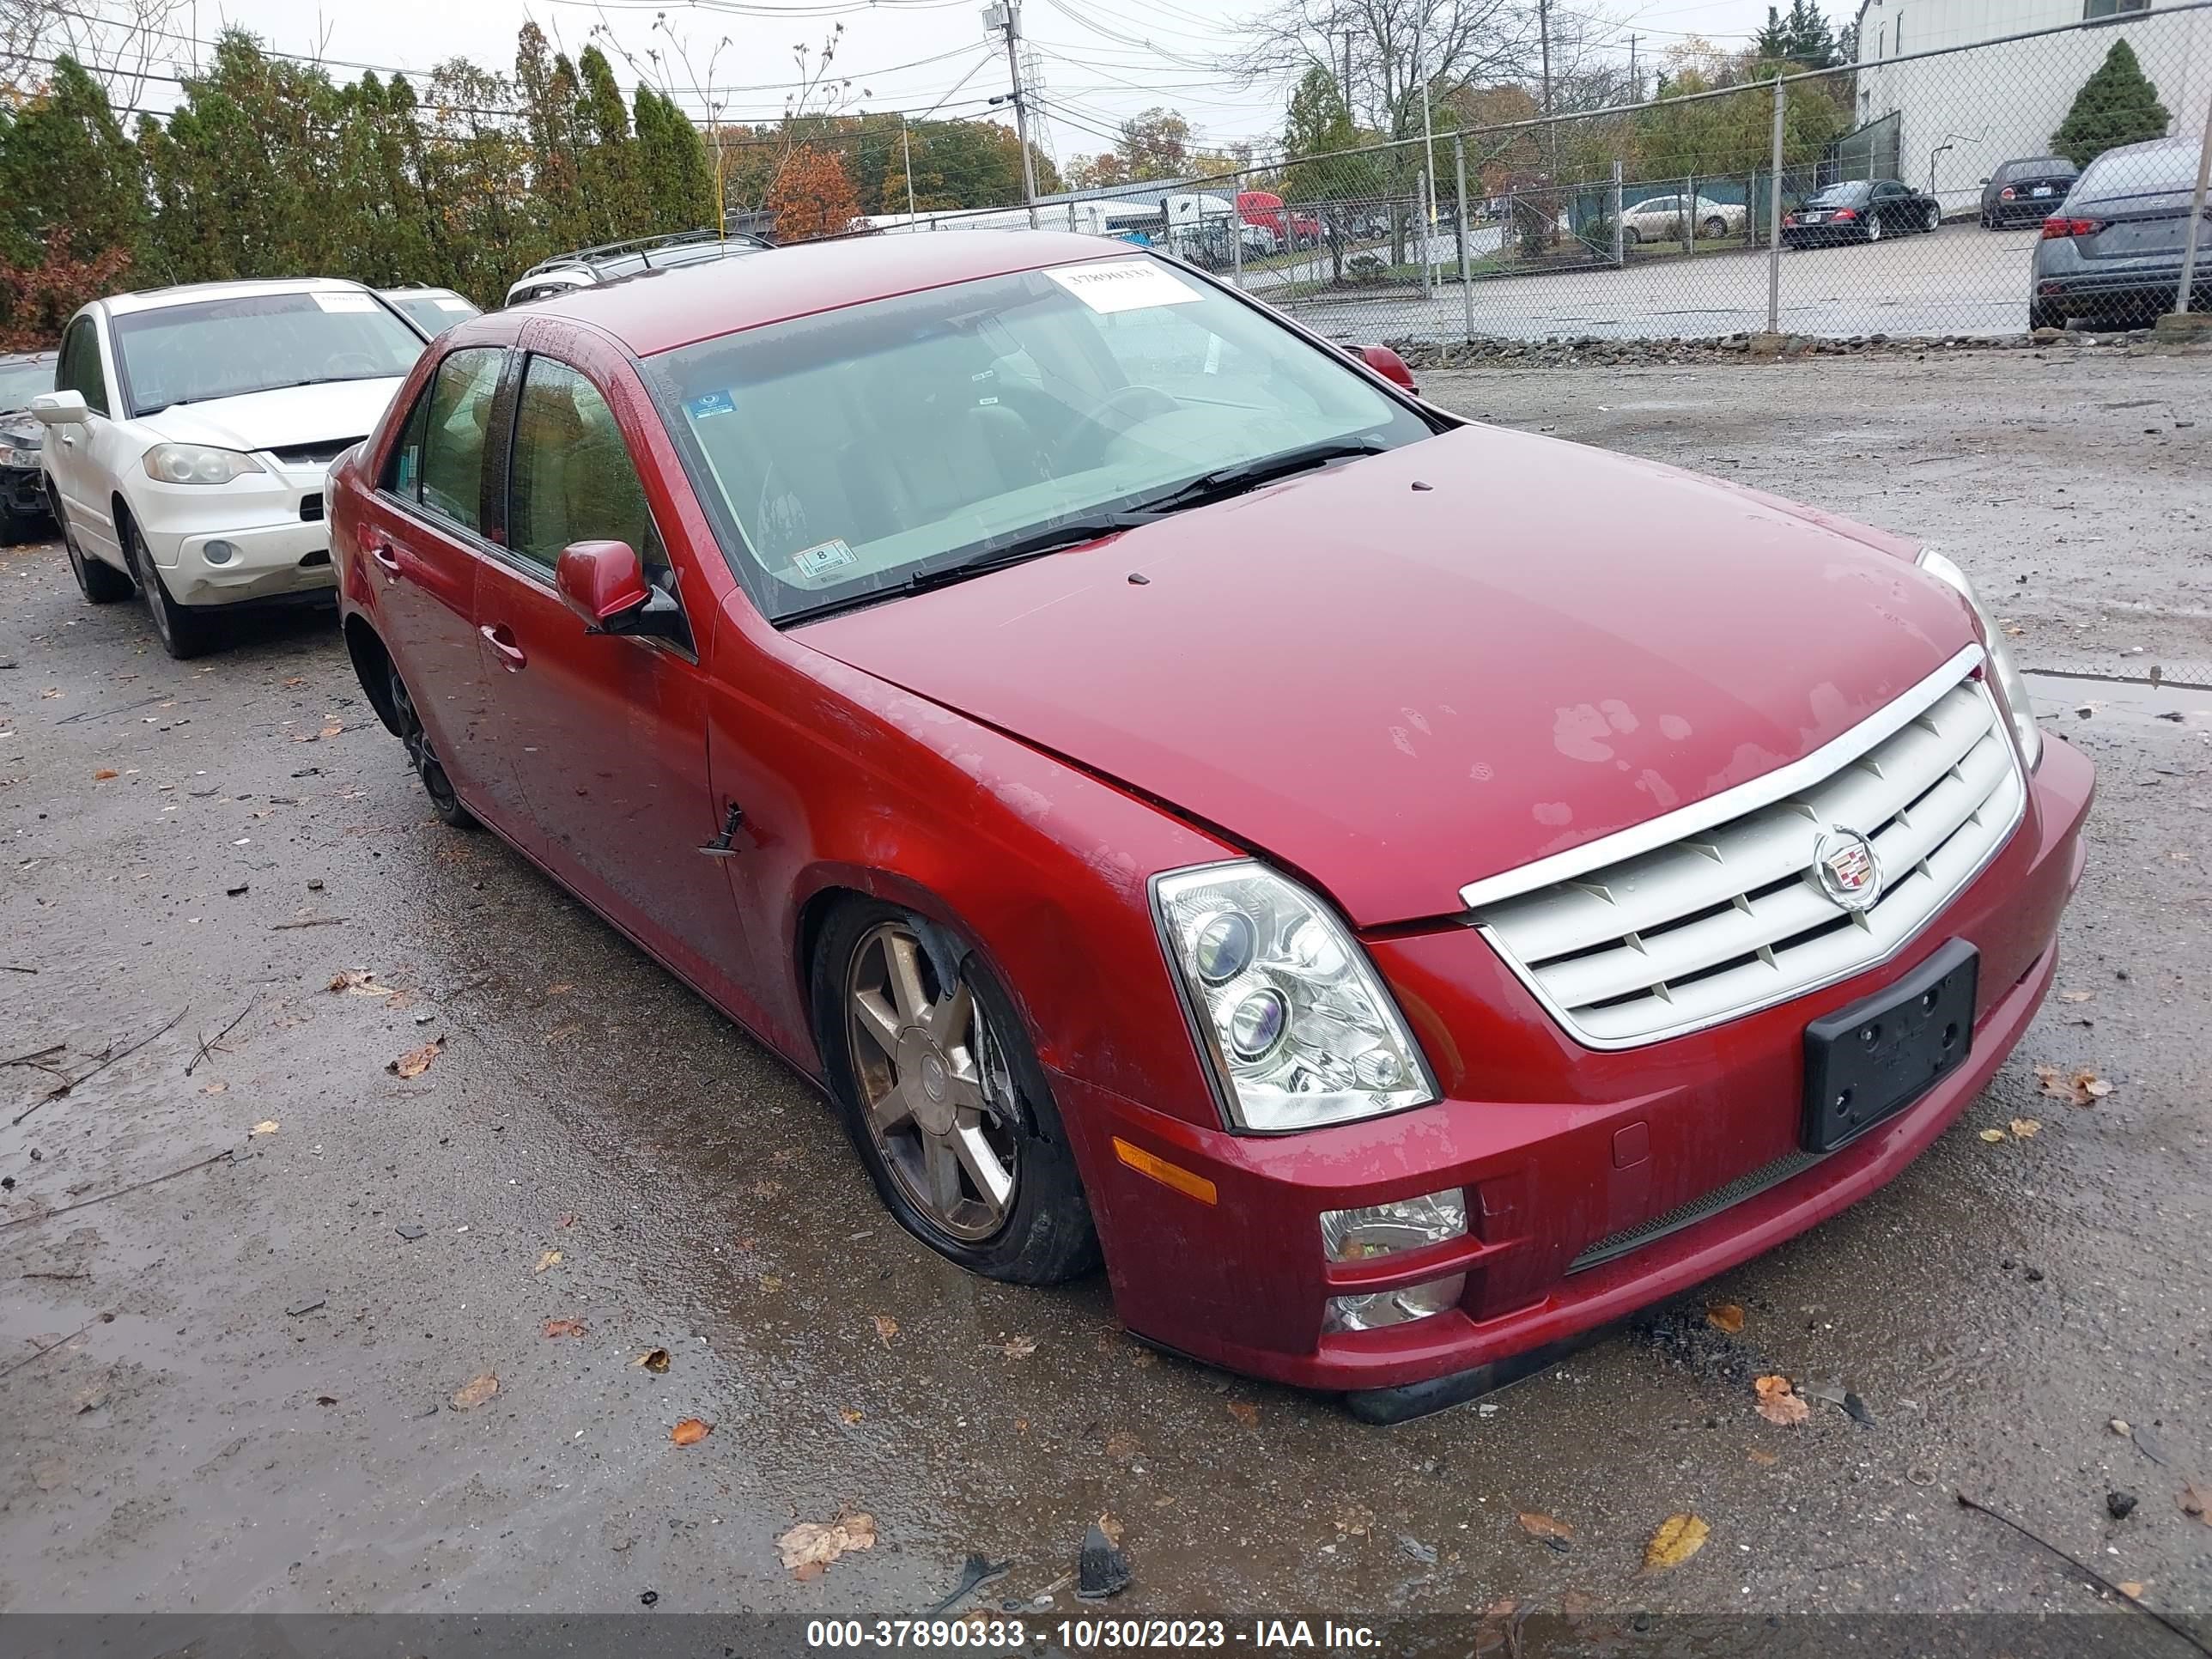 VIN: 1G6DC67A450138547 - cadillac sts